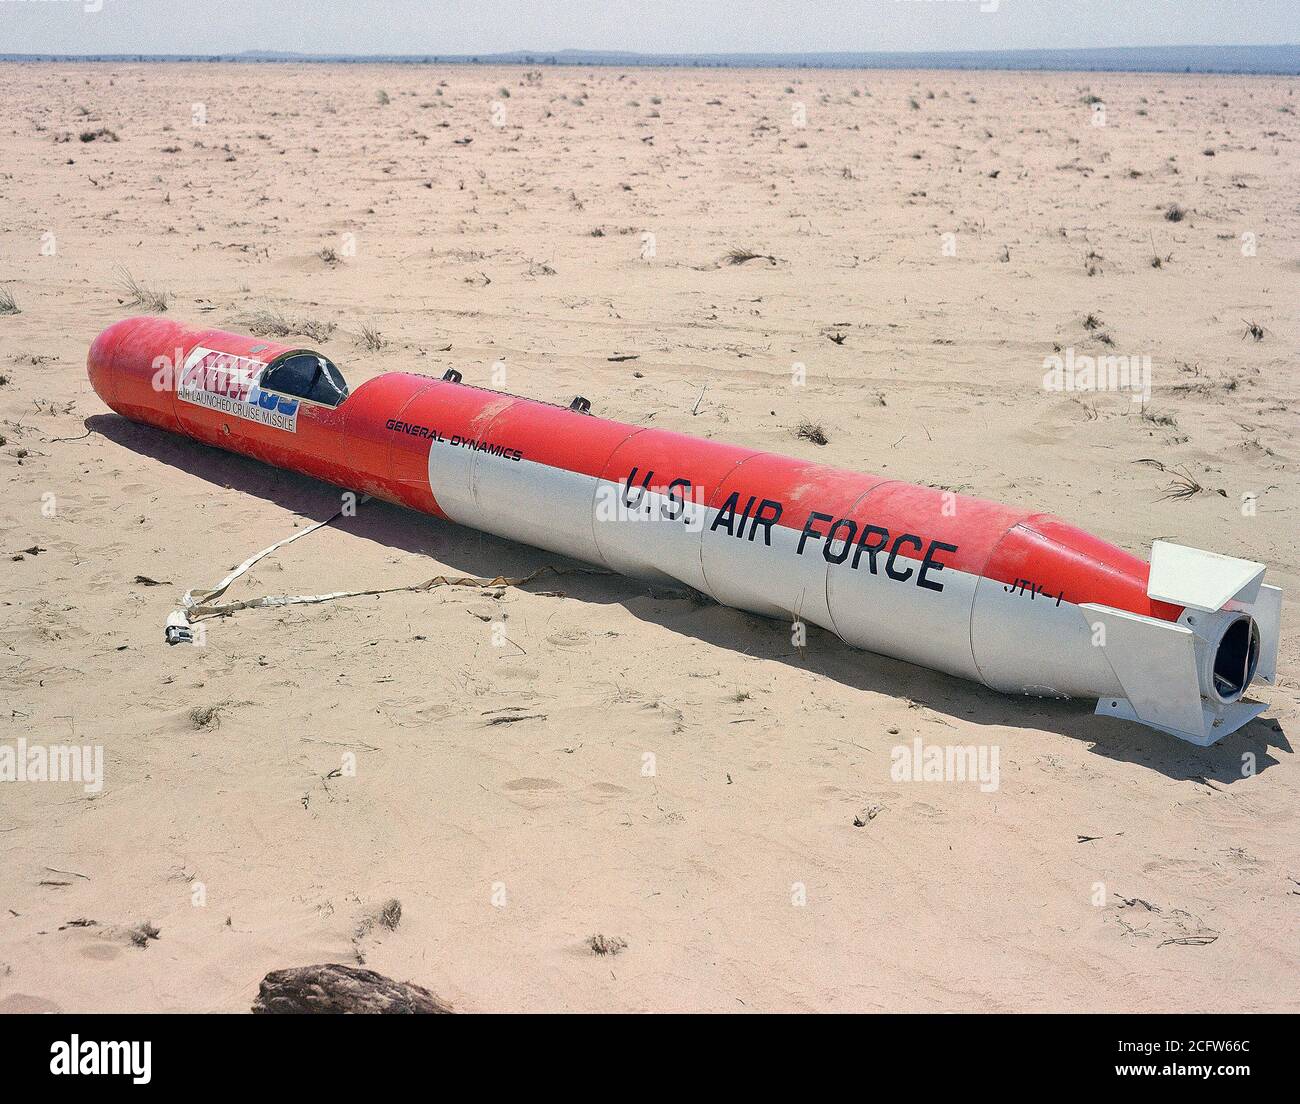 1979 - A rear view of an AGM-109 Tomahawk air-launched cruise missile on the ground after the impact. Stock Photo